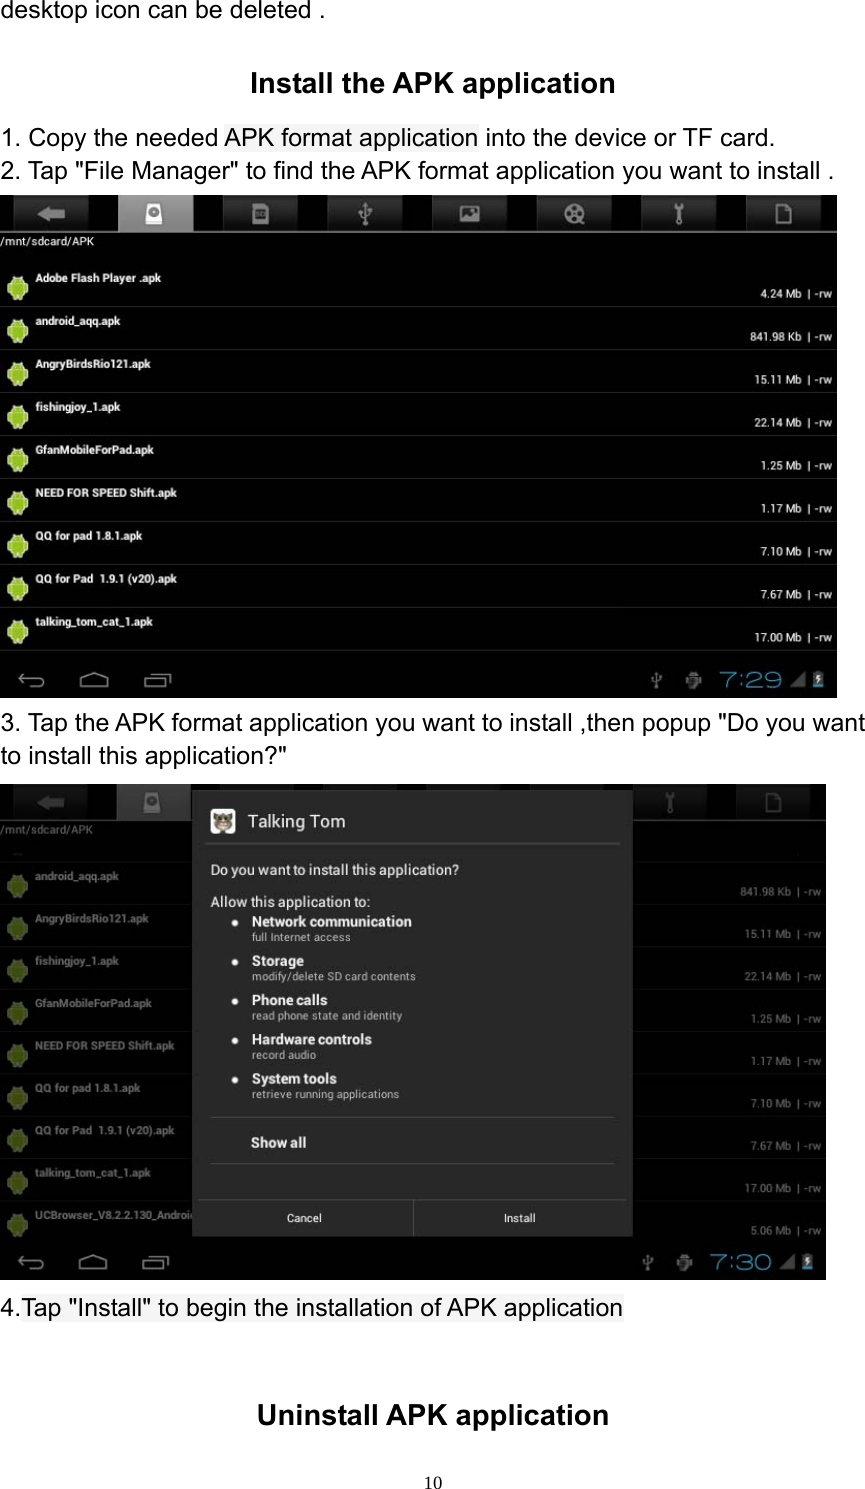  10desktop icon can be deleted .   Install the APK application   1. Copy the needed APK format application into the device or TF card.   2. Tap &quot;File Manager&quot; to find the APK format application you want to install .        3. Tap the APK format application you want to install ,then popup &quot;Do you want to install this application?&quot;  4.Tap &quot;Install&quot; to begin the installation of APK application    Uninstall APK application   